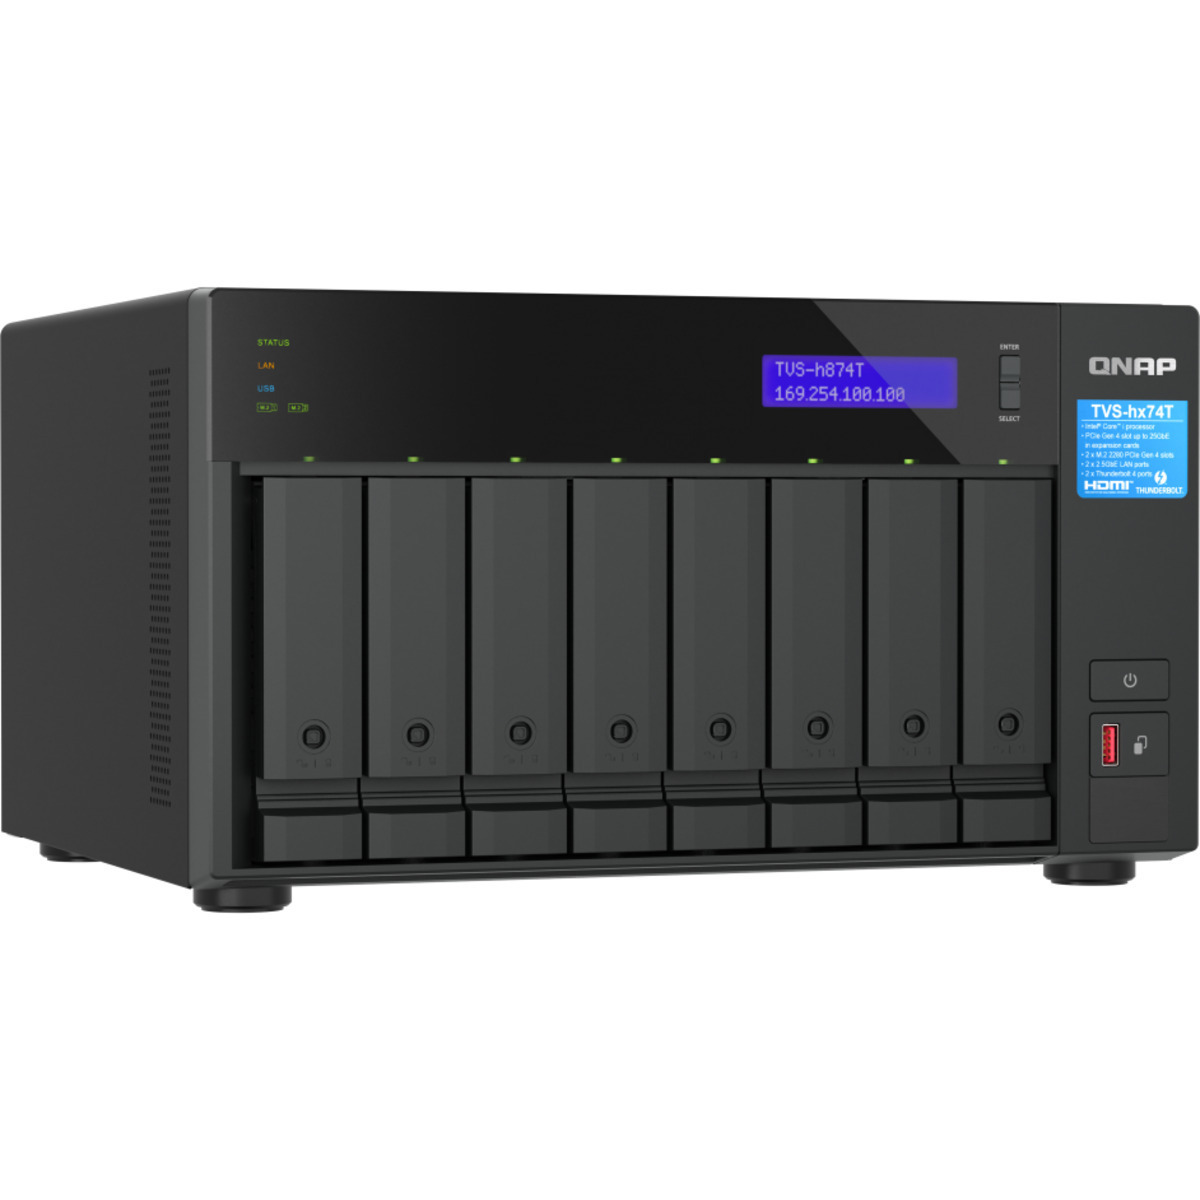 QNAP TVS-h874T Core i9 Thunderbolt 4 96tb 8-Bay Desktop Multimedia / Power User / Business DAS-NAS - Combo Direct + Network Storage Device 4x24tb Western Digital Red Pro WD240KFGX 3.5 7200rpm SATA 6Gb/s HDD NAS Class Drives Installed - Burn-In Tested TVS-h874T Core i9 Thunderbolt 4